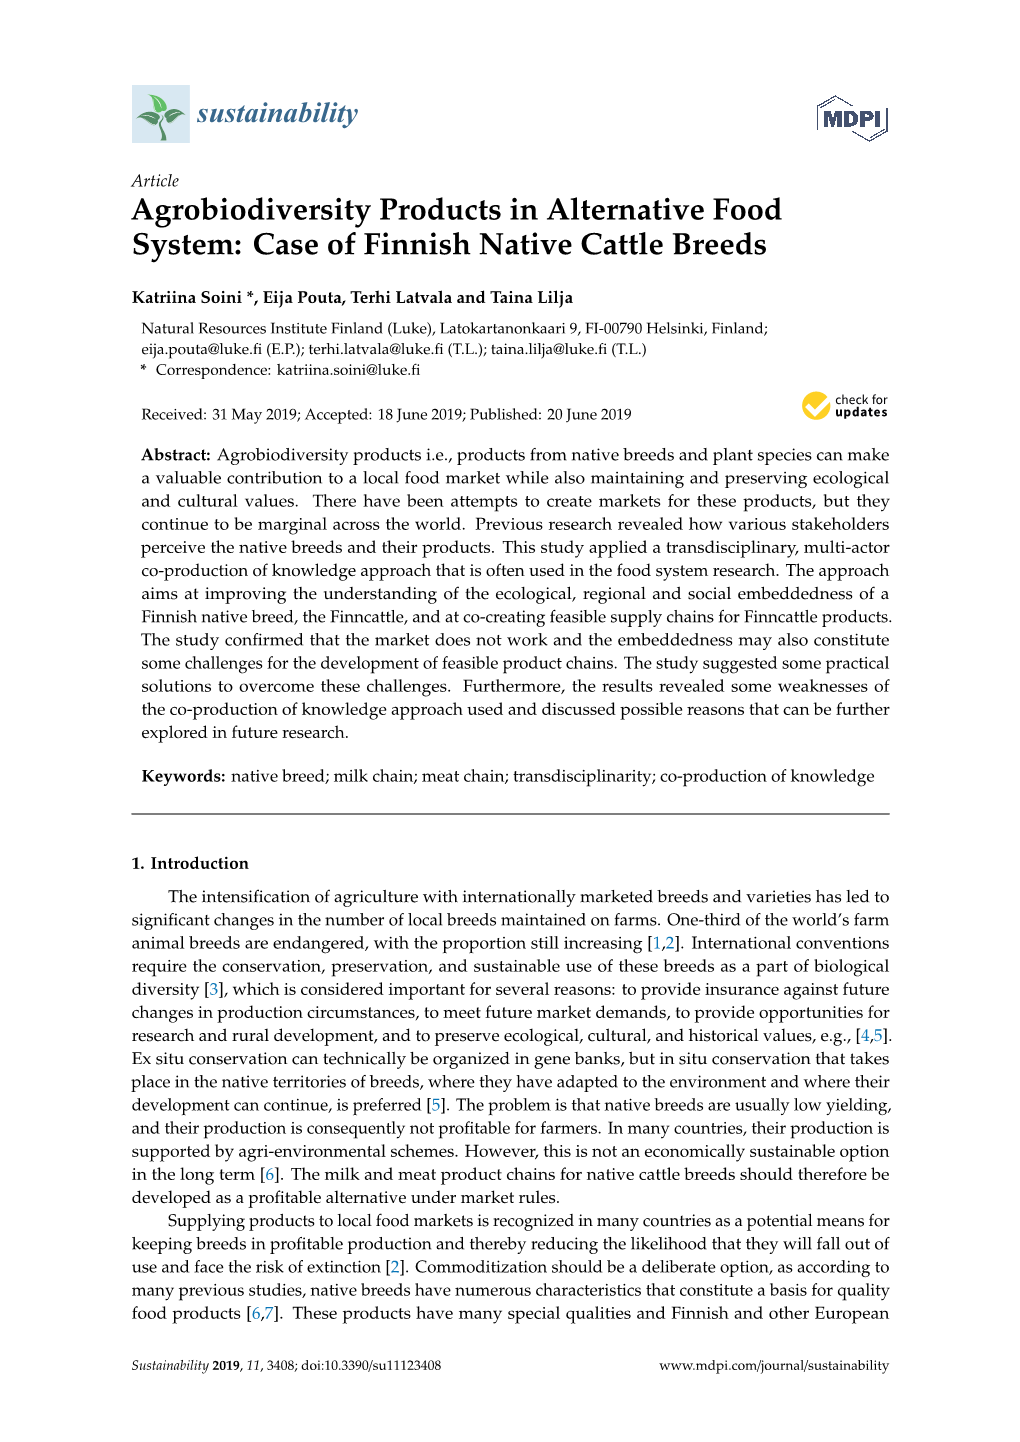 Case of Finnish Native Cattle Breeds